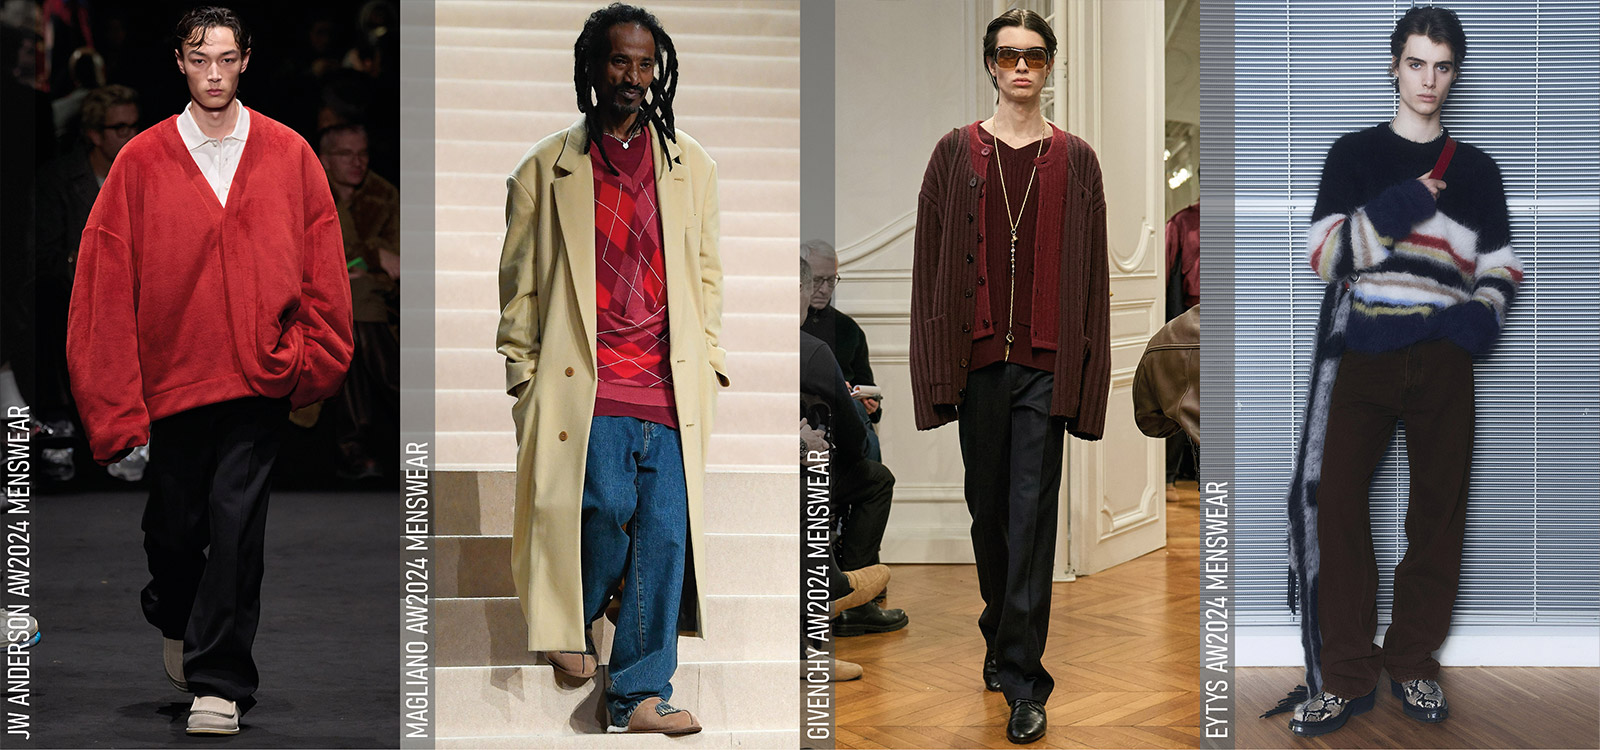 Grandpacore looks at JW Anderson, Magliano, Givenchy, Eytys